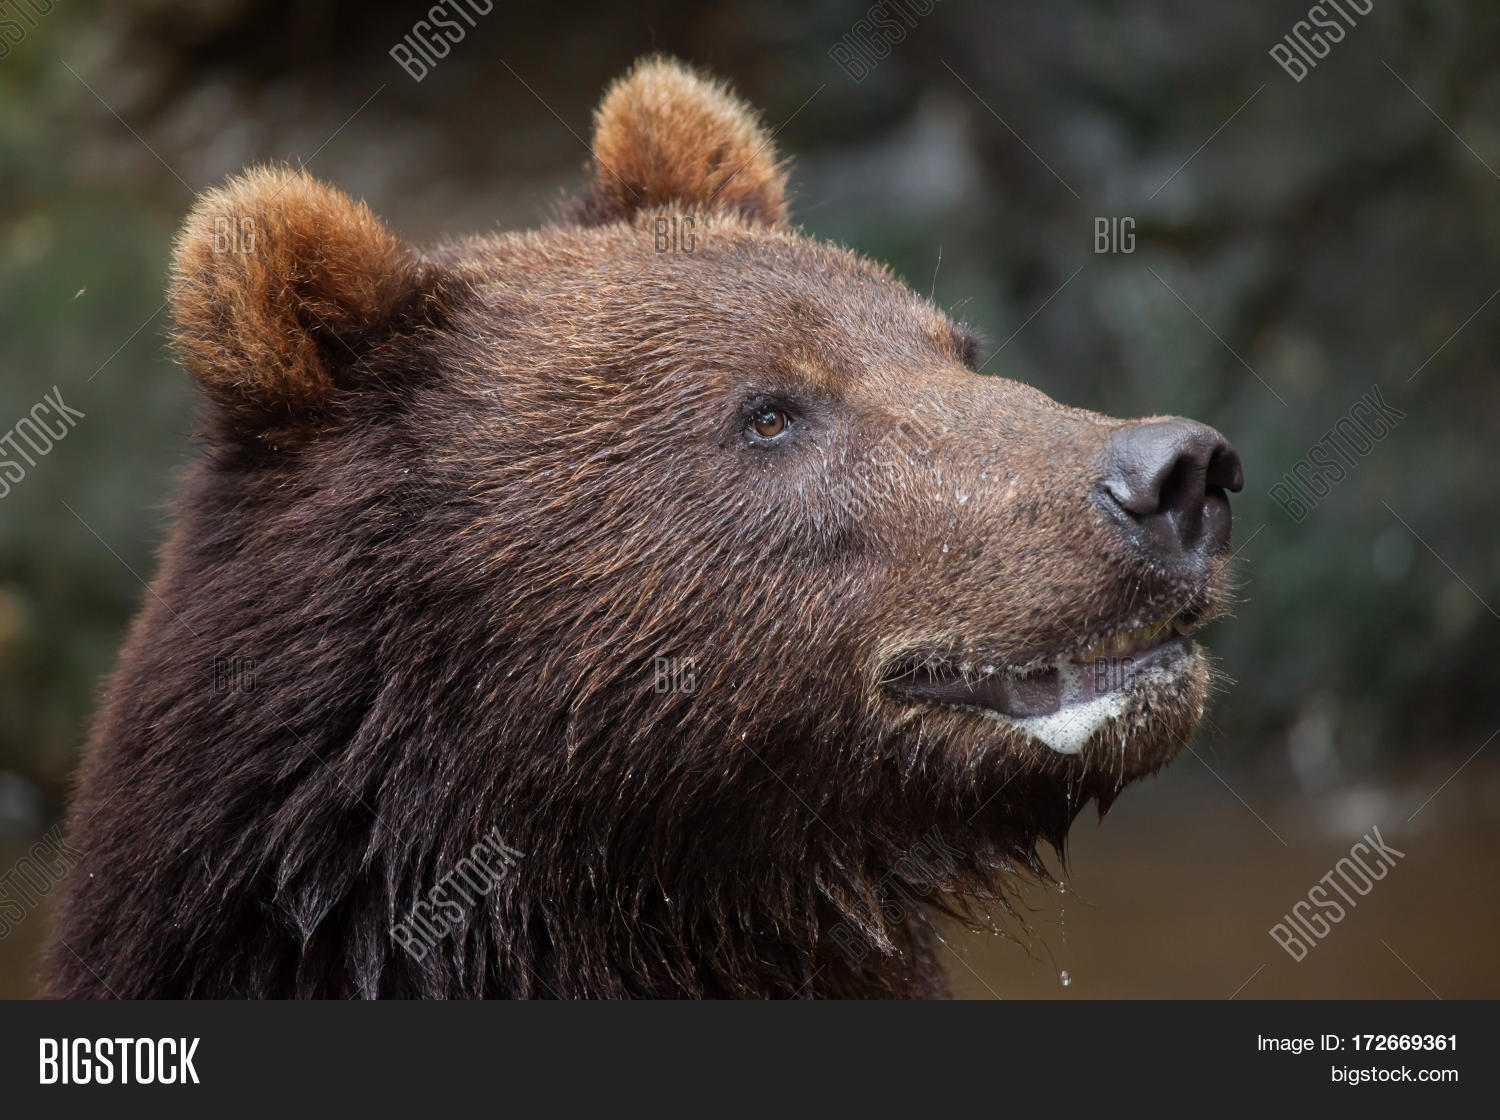 Images of Eastern Brown Bear | 1500x1120